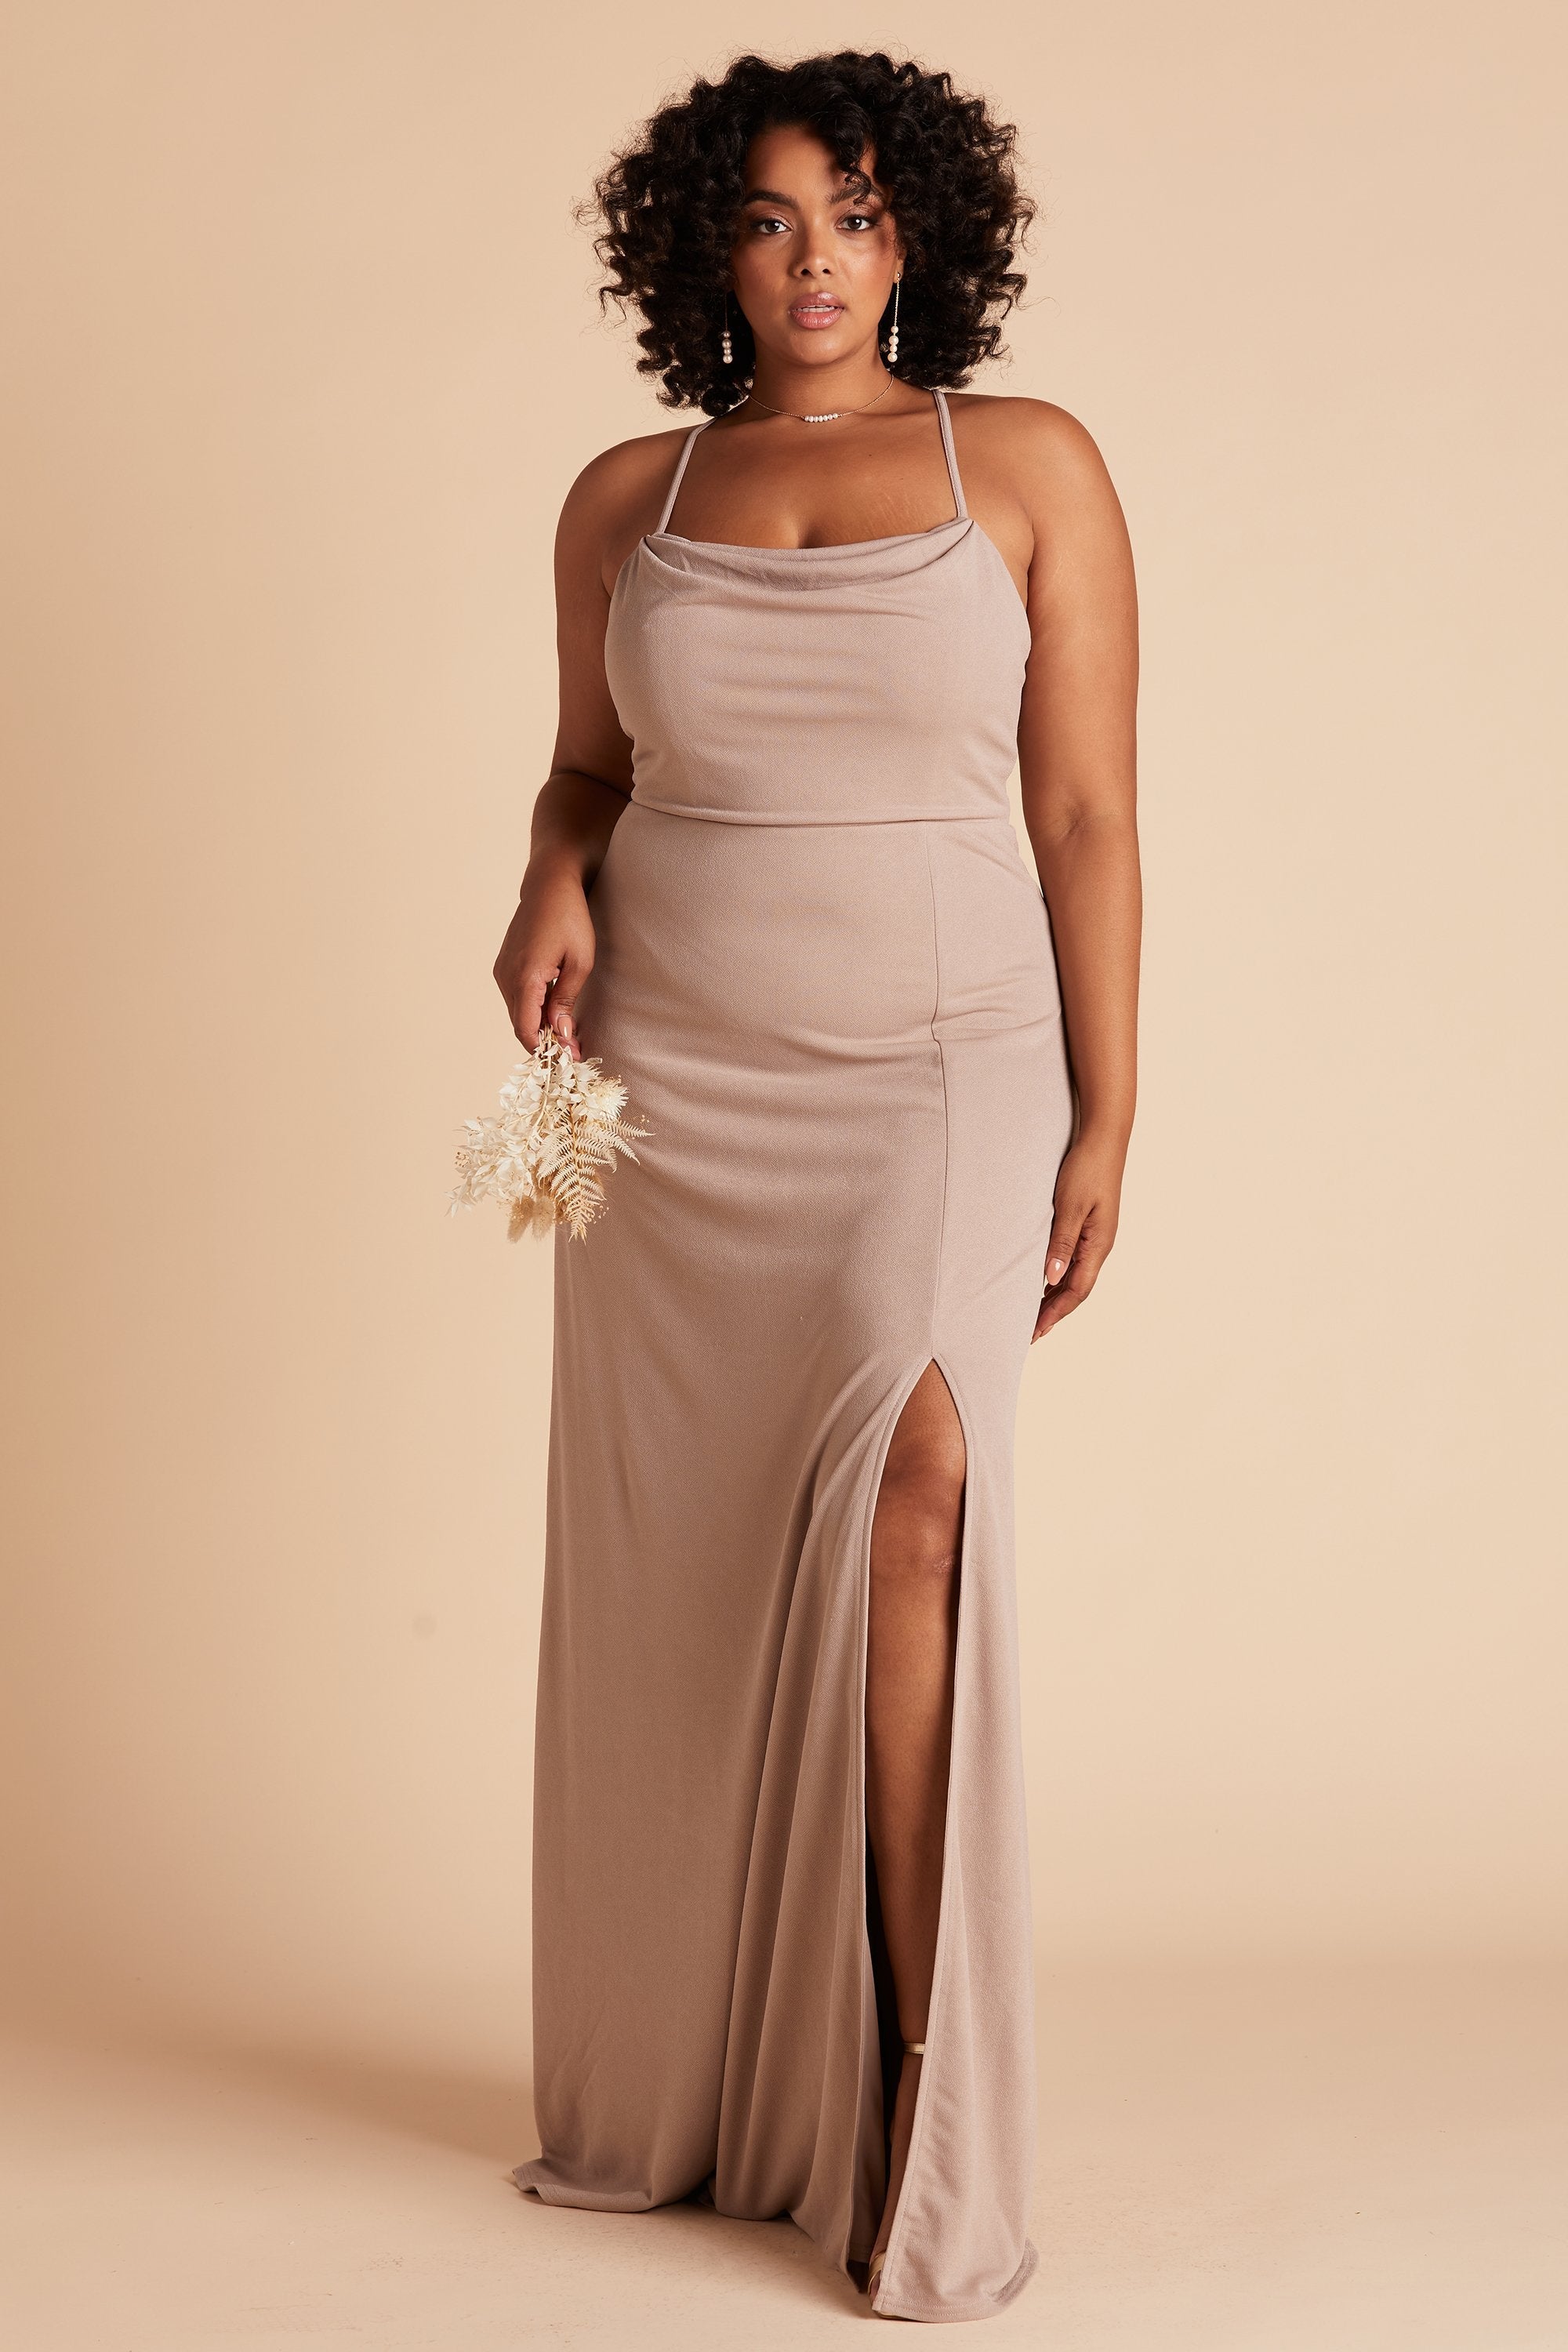 Front view of the floor-length Ash Plus Size Bridesmaid Dress in taupe crepe worn by a curvy model with a medium-dark skin tone.